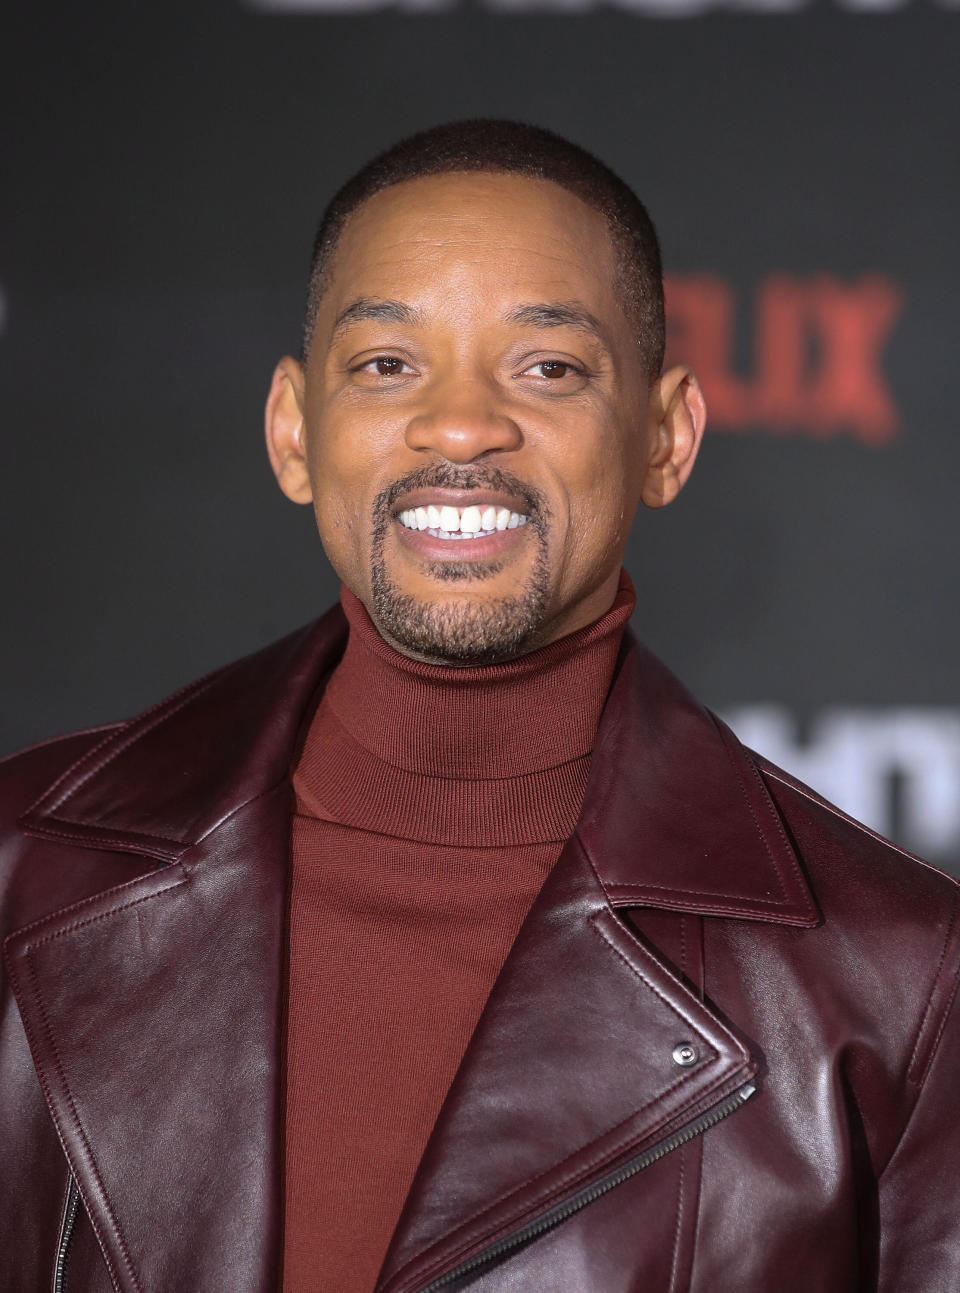 Will Smith at the premiere of "Bright" in London on Dec. 15, 2017. (Photo: Mike Marsland via Getty Images)